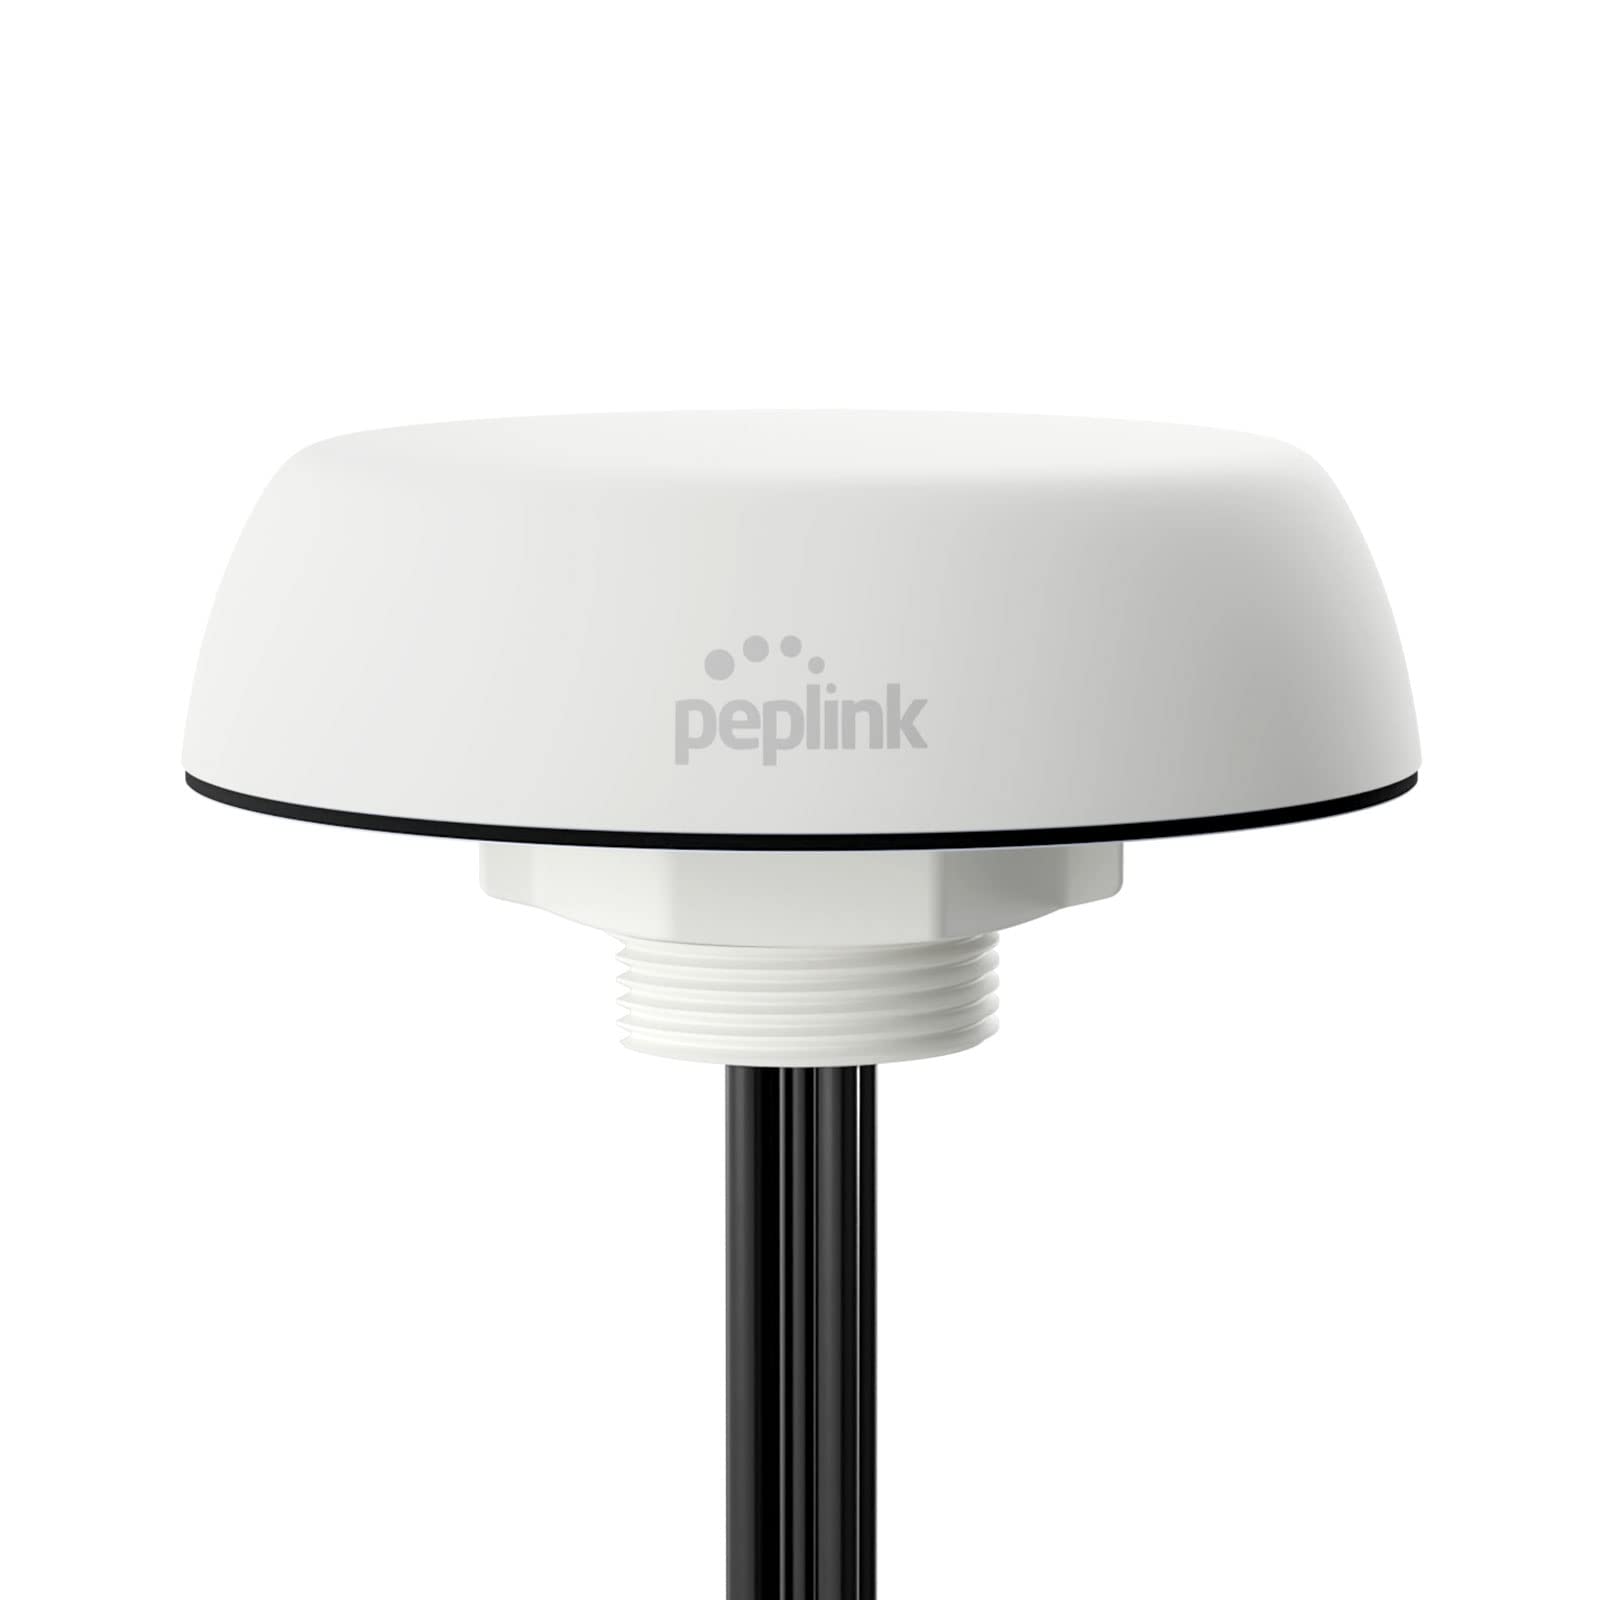 Peplink Mobility 40G, 4x4 Mimo 5G Ready Cellular Antenna with GPS Receiver, SMA, 6.5ft/2m, White | ANT-MB-40G-S-W-6